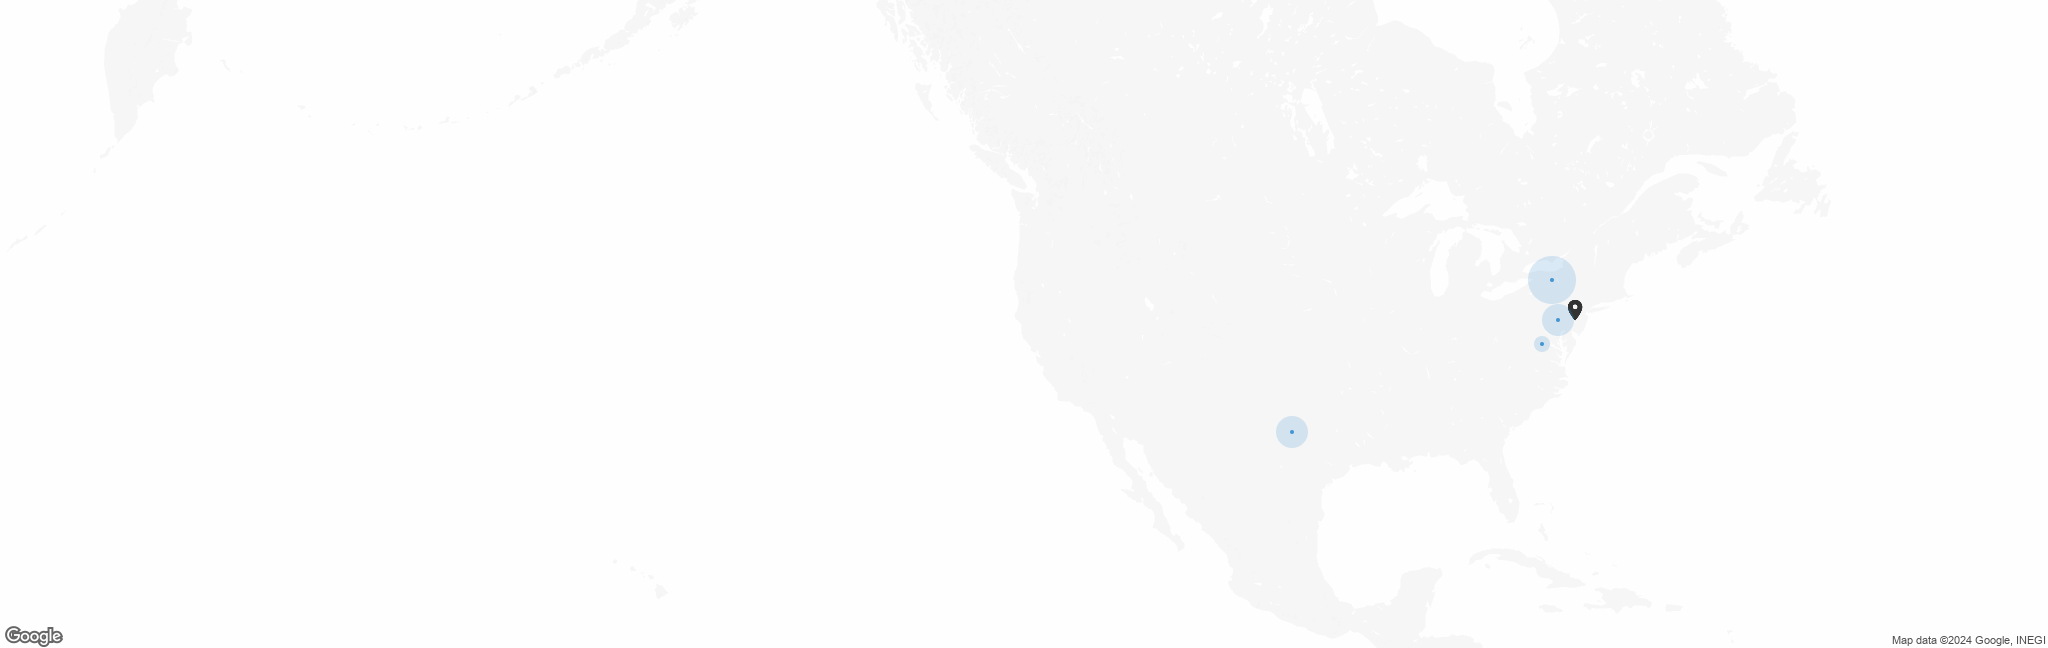 Map of US with pin of Smell and Taste Association of North America location